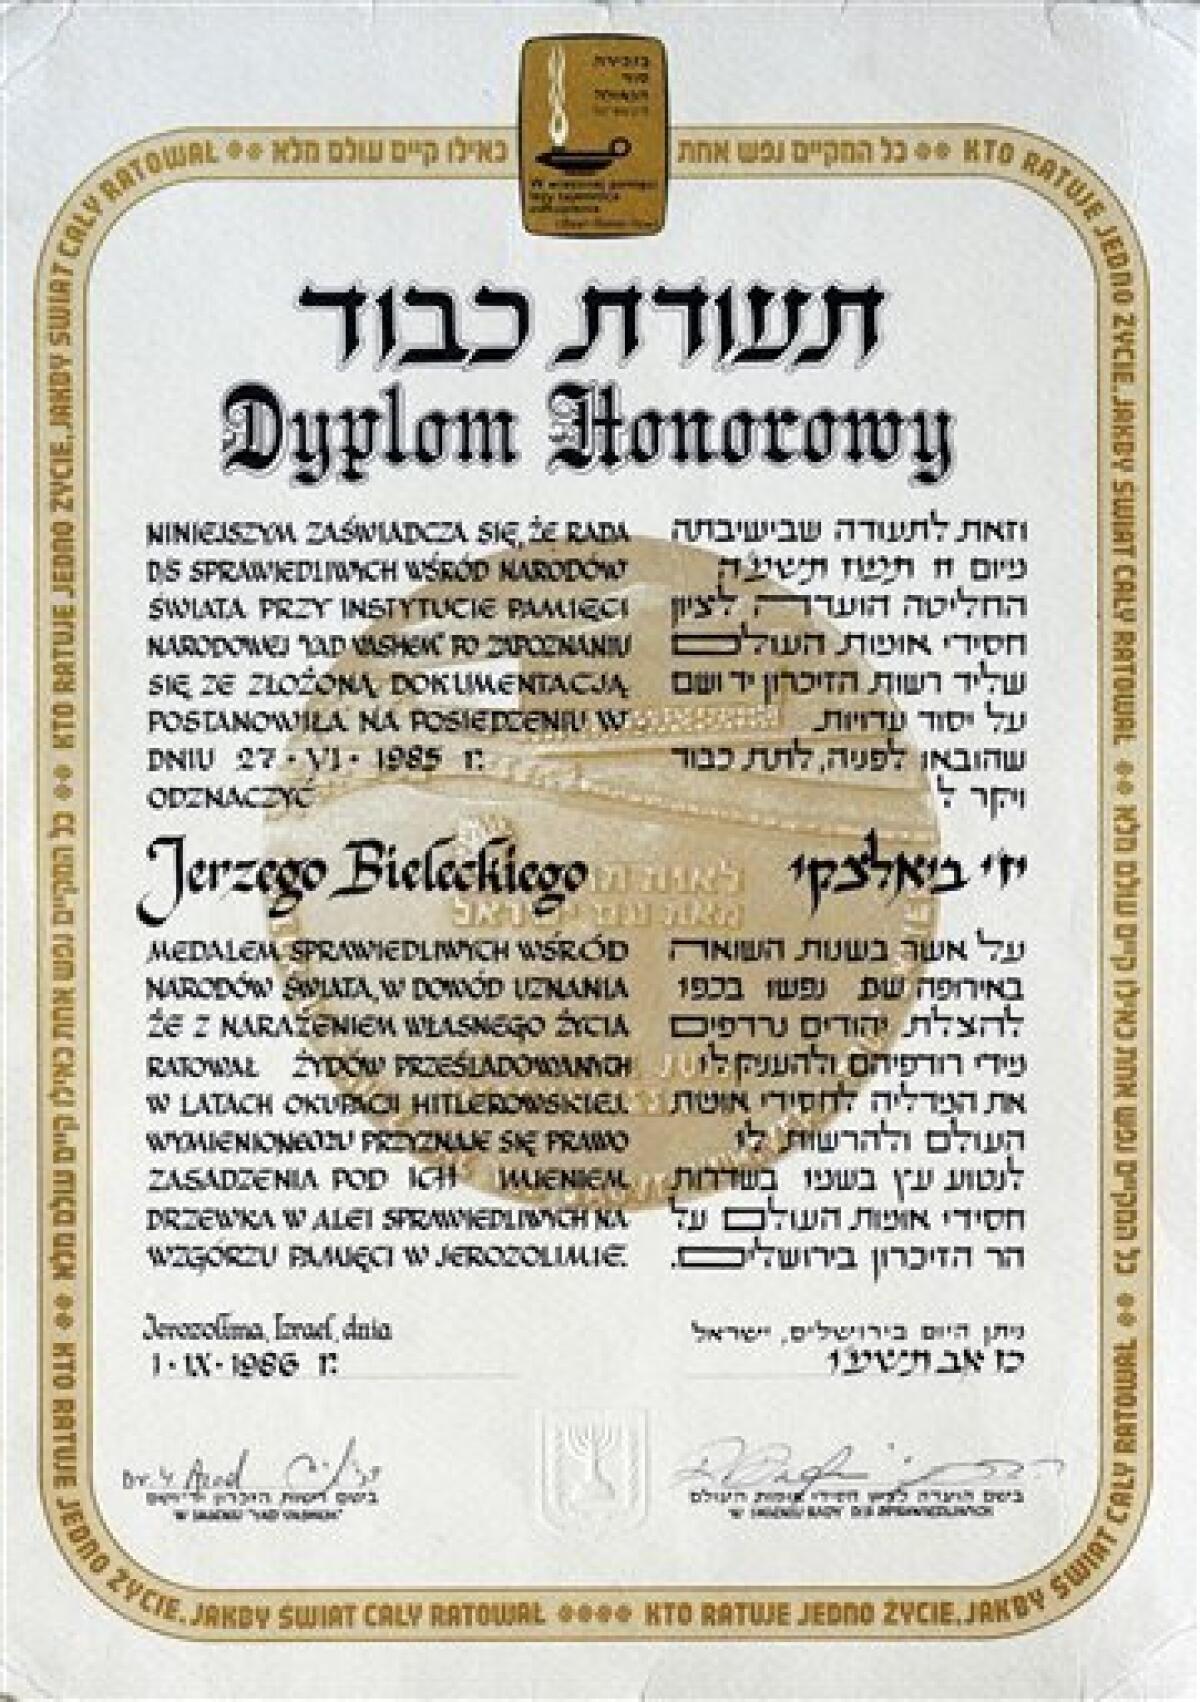 In this May 11, 2010 photo a copy of the diploma from the Yad Vashem Institute in Jerusalem awarding Jerzy Bielecki the Righteous Among the Nations title for saving Cyla Cybulska, is seen in Nowy Targ, southern Poland. 60 years ago Bielecki, then an Auschwitz Birkenau prisoner, escaped from the death camp with his Jewish girlfriend, Cyla Cybulska. (AP Photo/Alik Keplicz)